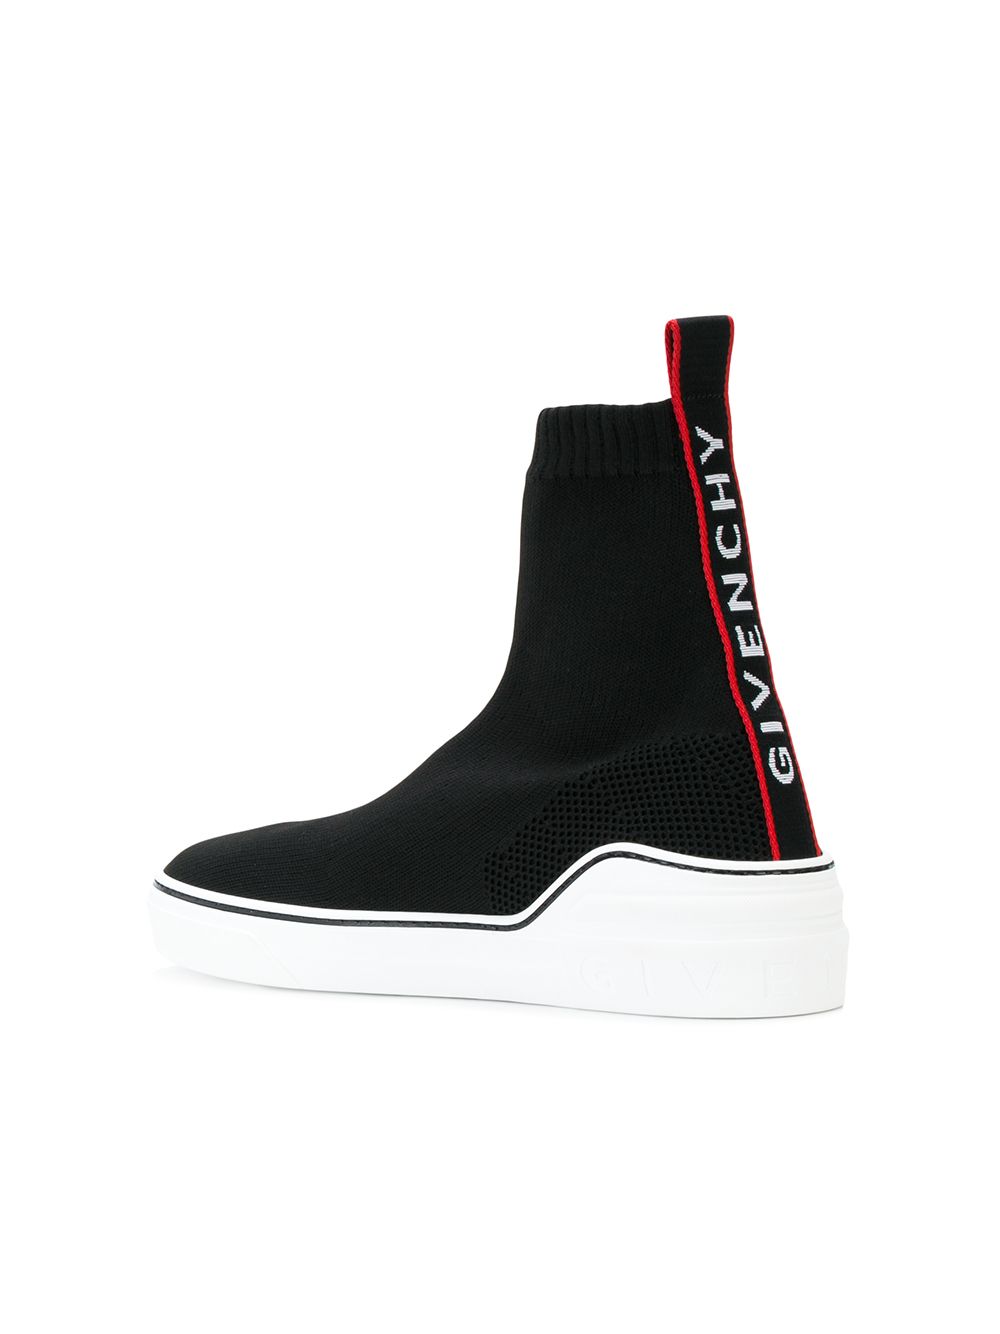 Givenchy sock style sneakers $512 - Buy 